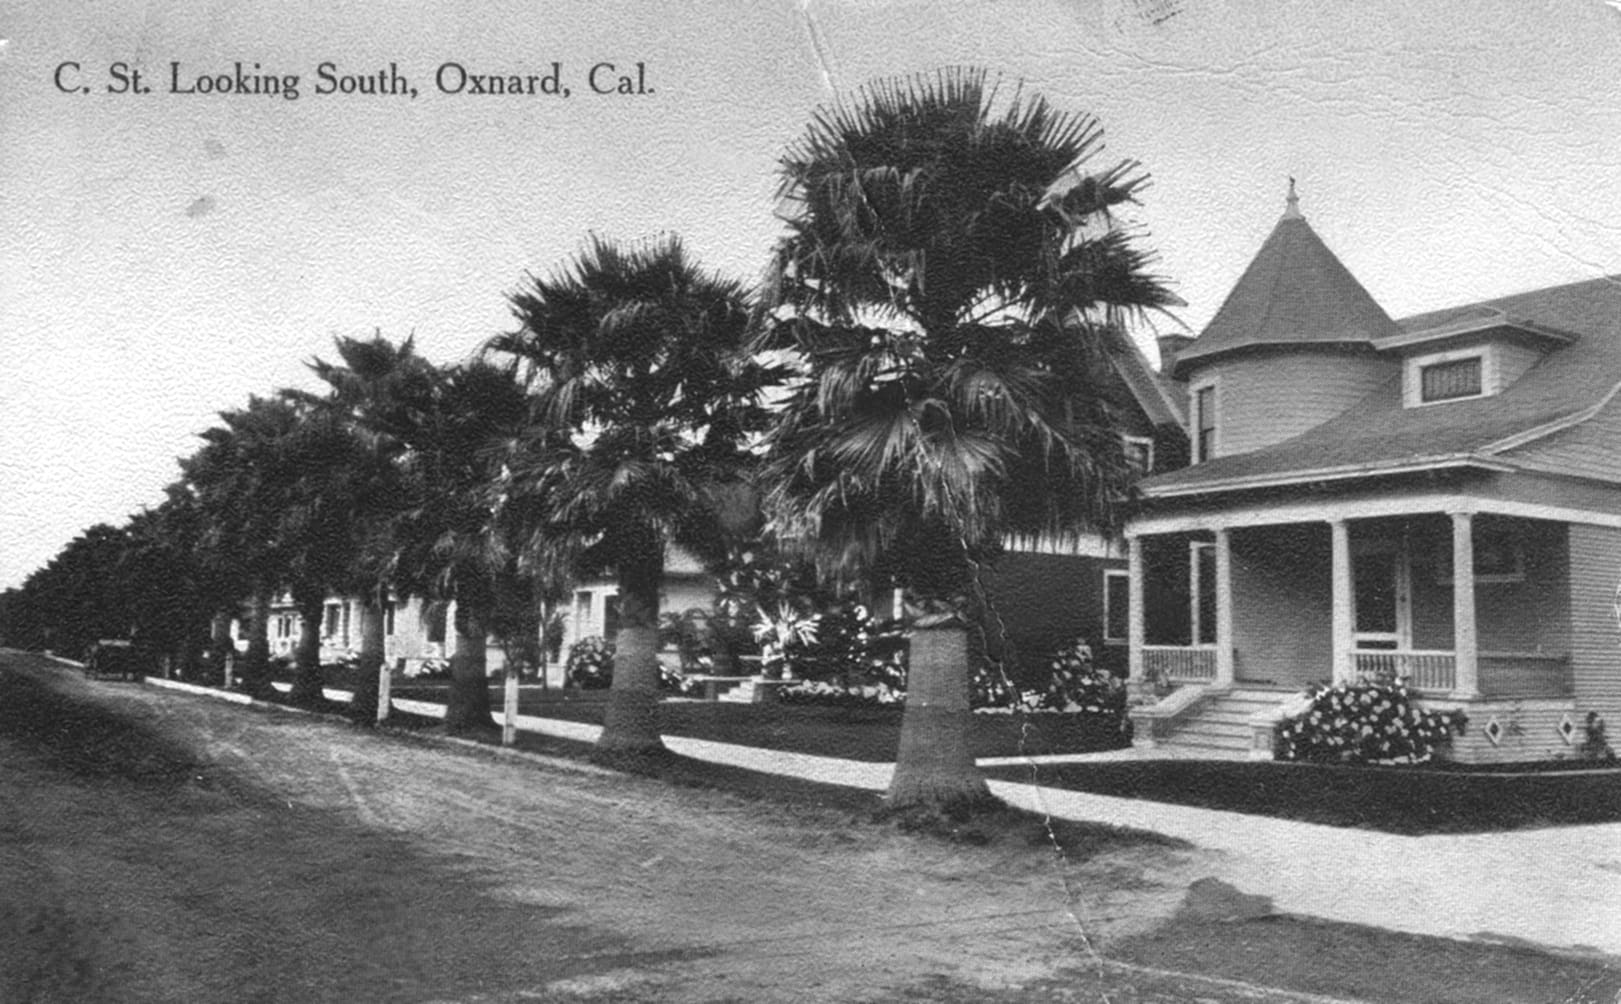 Historic black and white photo of C Street looking south in Oxnard, California, featuring a row of palm trees and Victorian houses near Heritage Square.